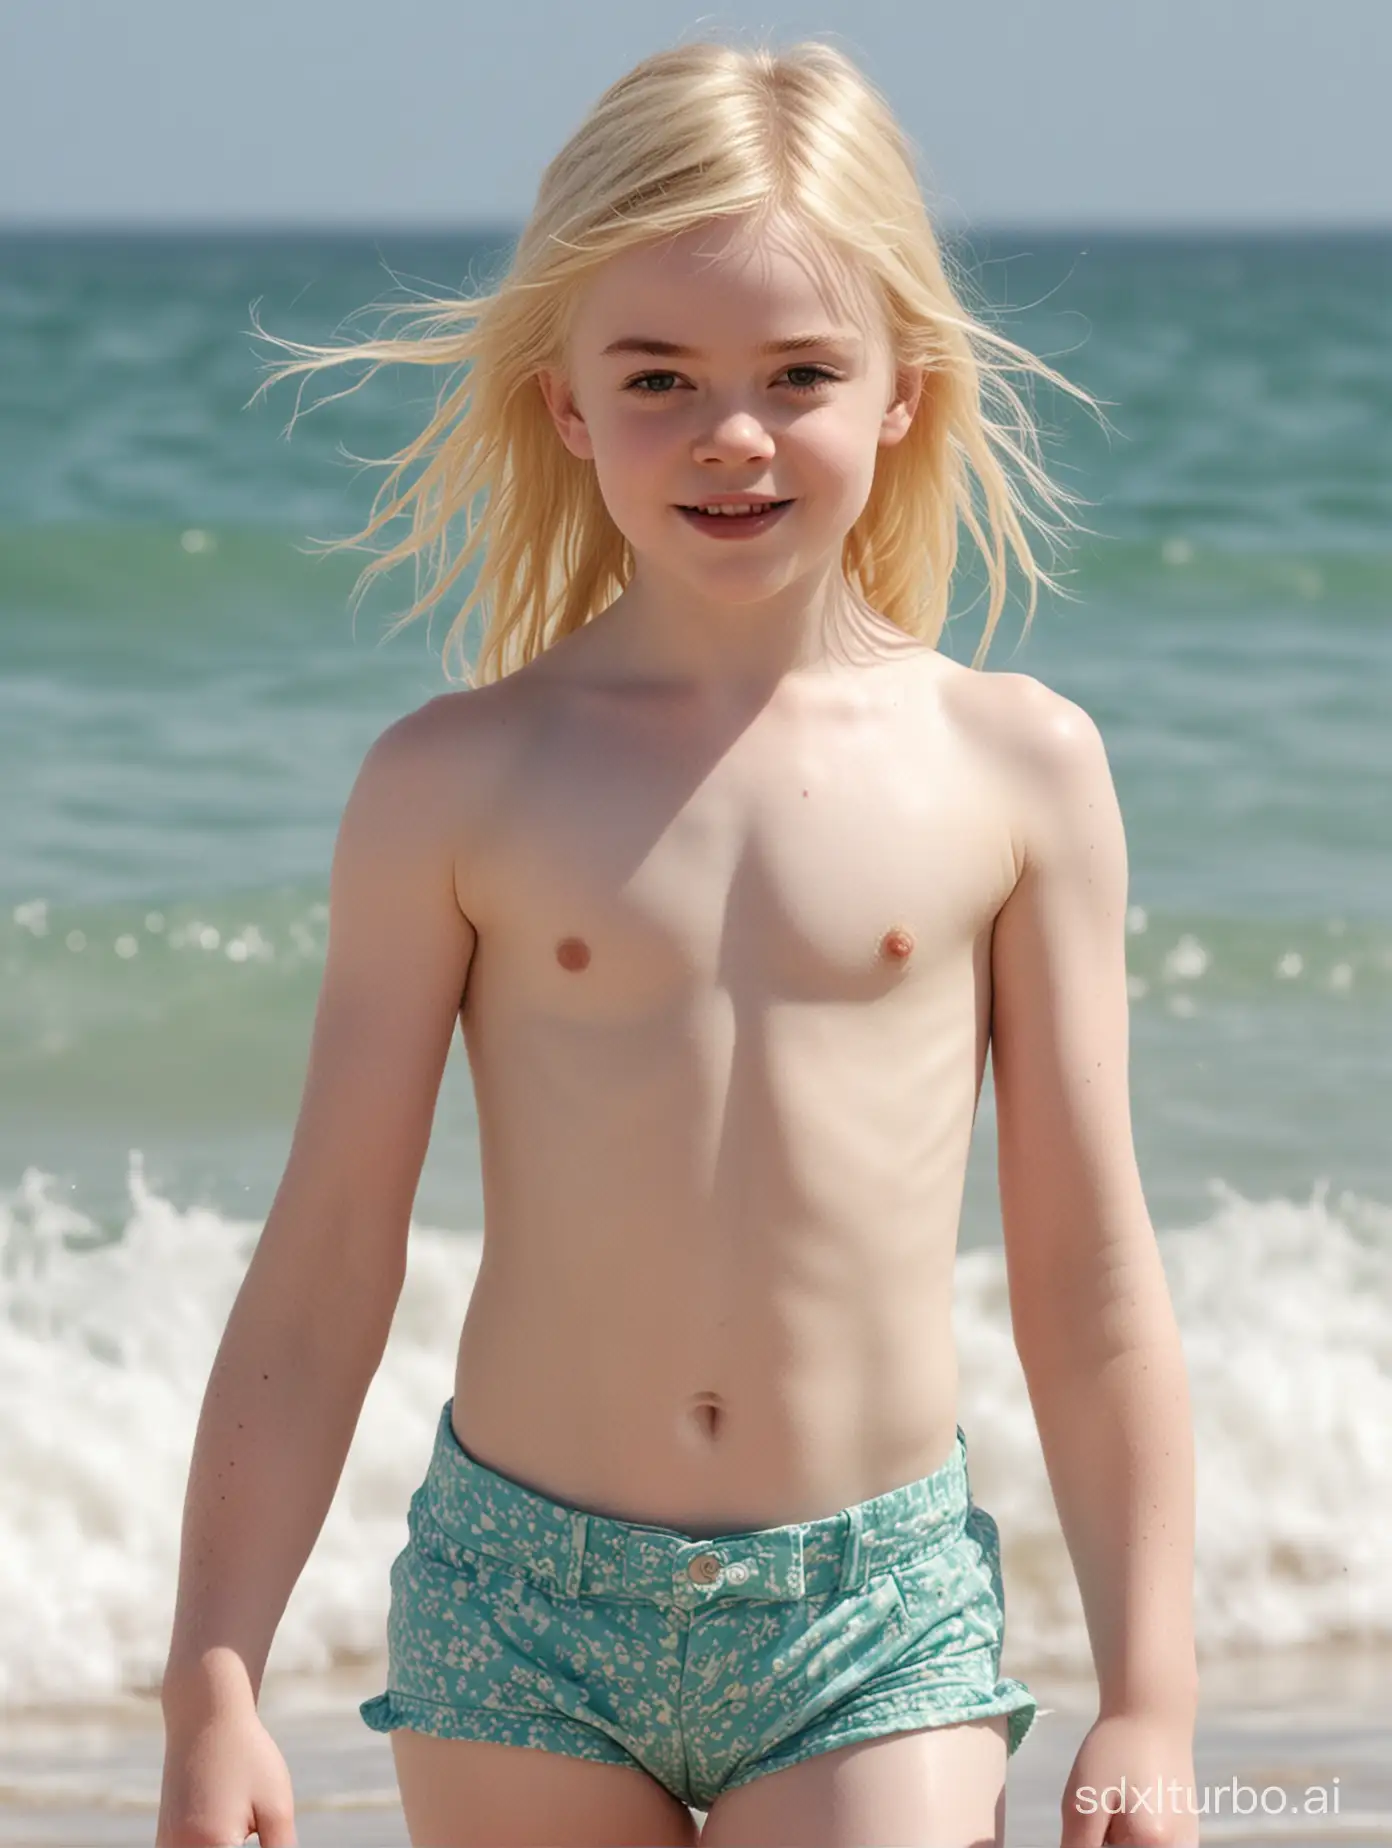 Young-Elle-Fanning-with-Toned-Abs-Enjoying-Sunny-Day-at-the-Beach